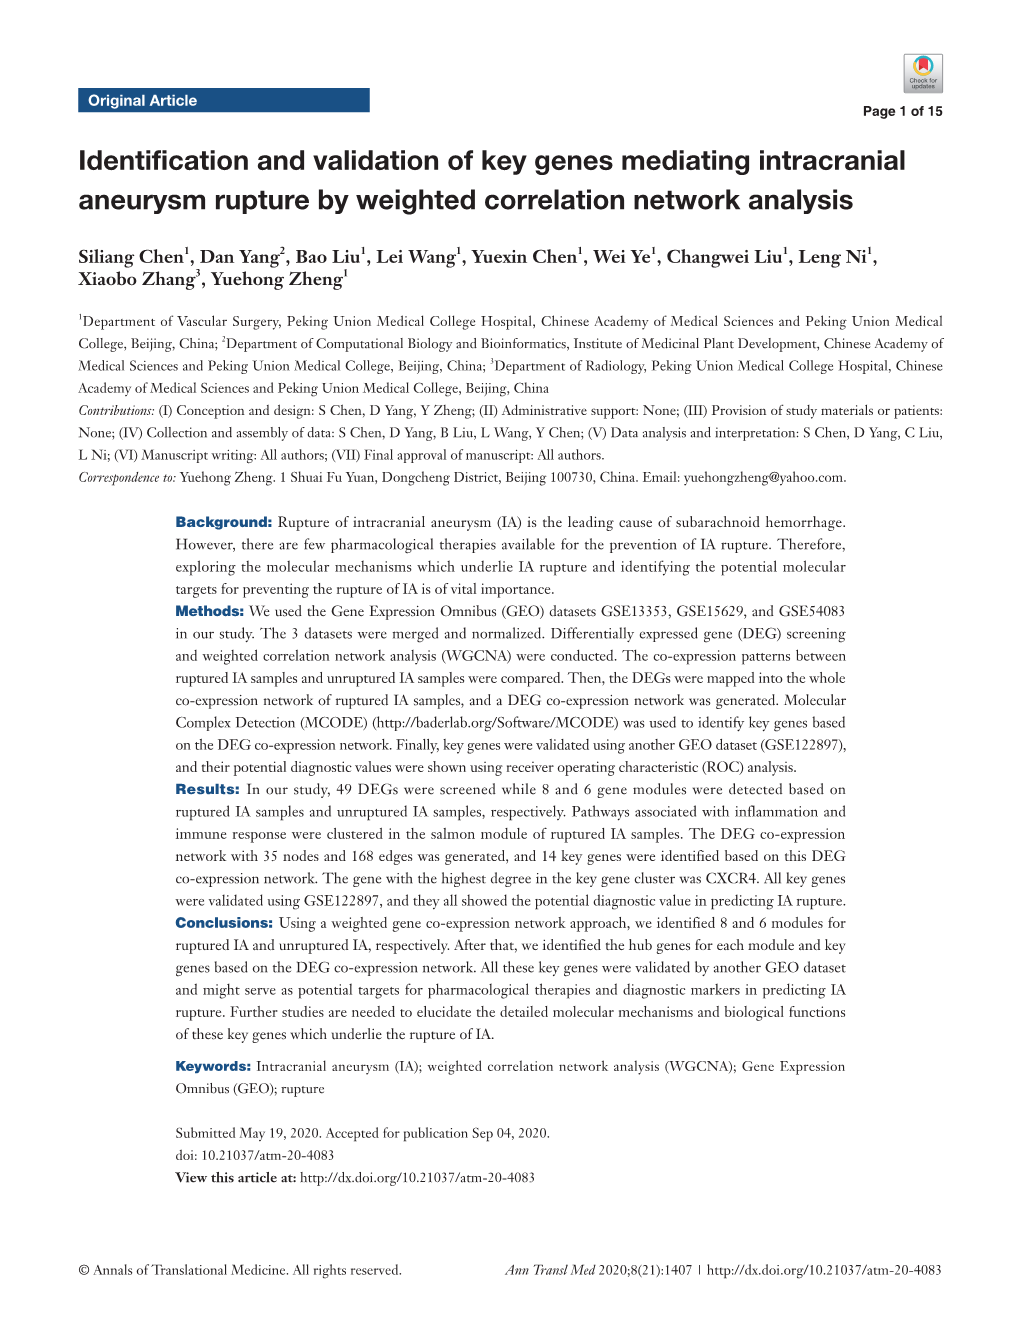 Identification and Validation of Key Genes Mediating Intracranial Aneurysm Rupture by Weighted Correlation Network Analysis